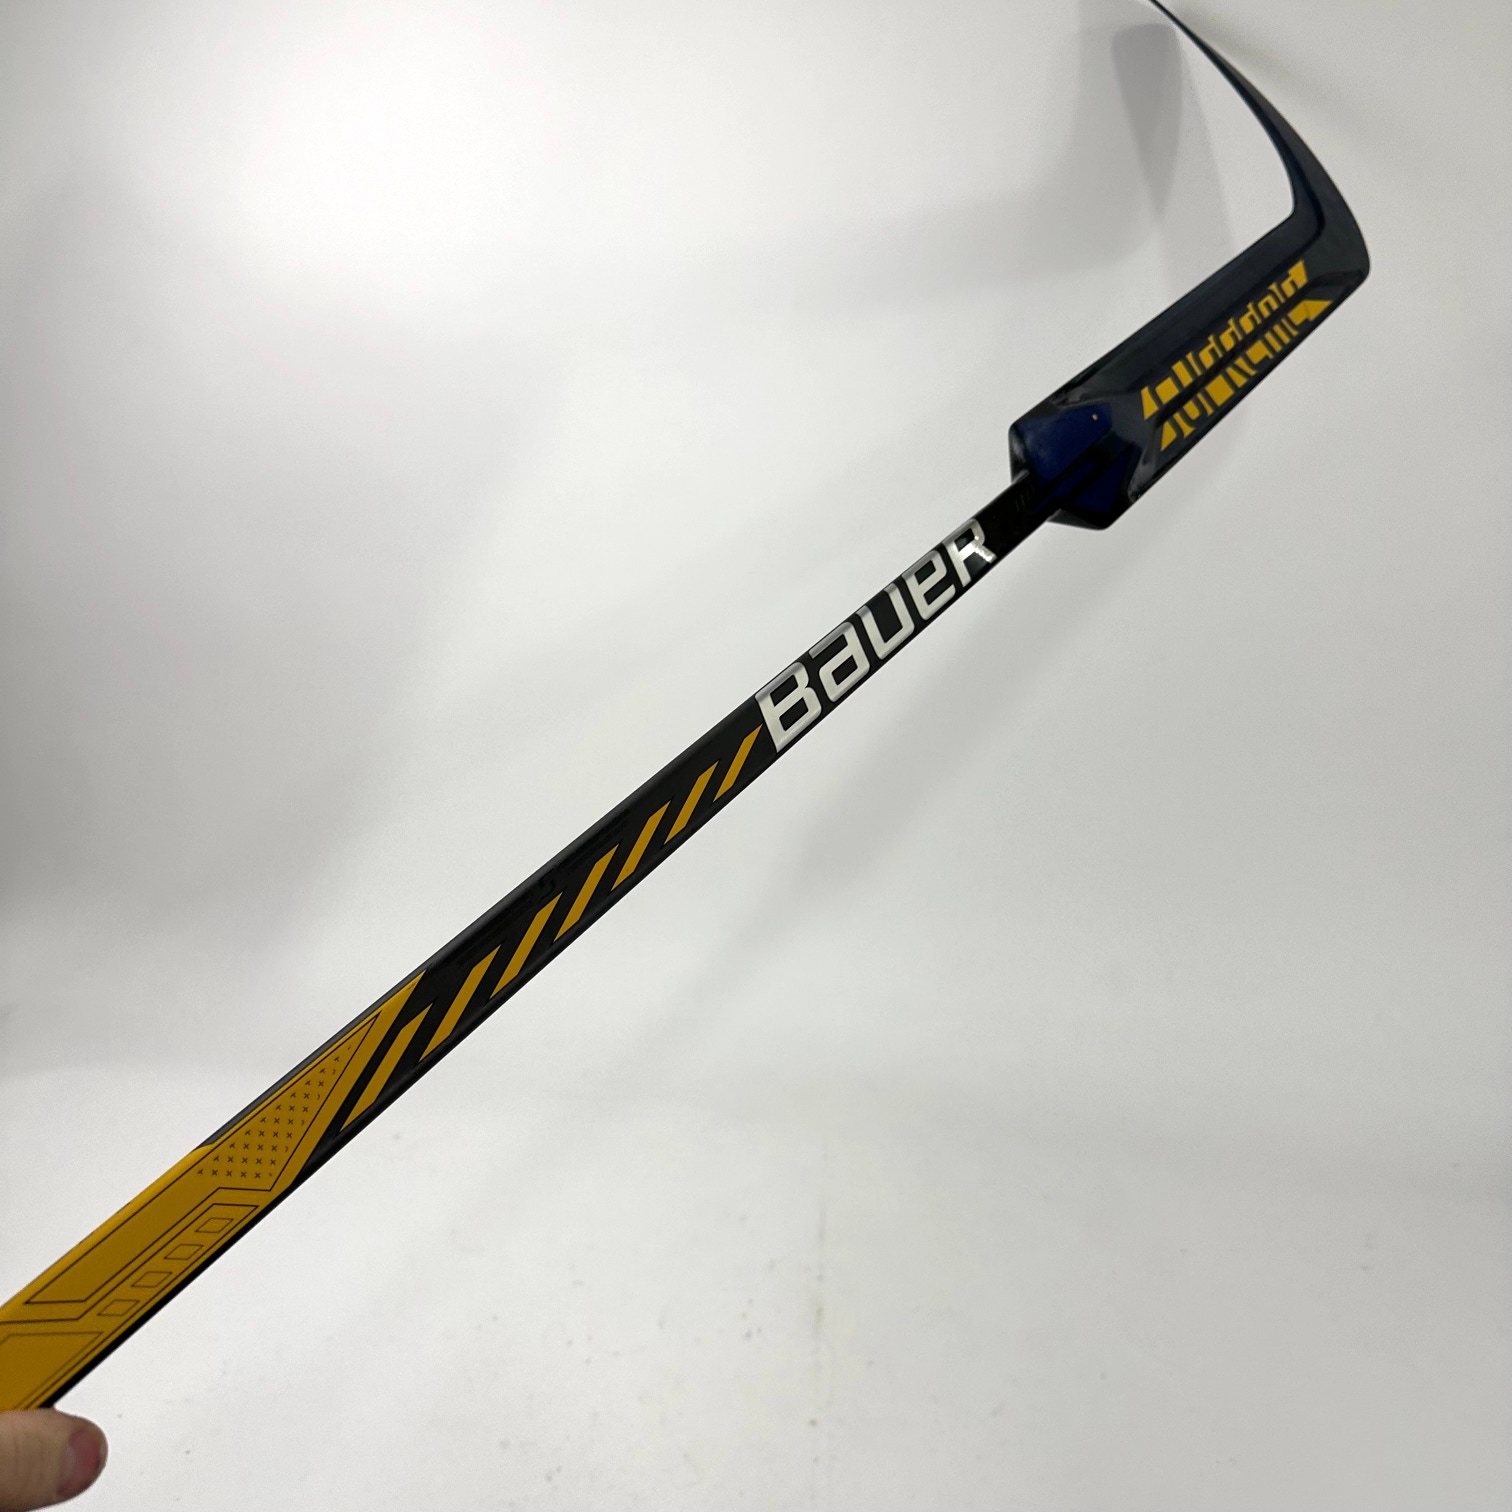 Brand New Full Right Blue and Yellow Bauer Supreme Mach Goalie Stick | P34 Curve 25" Paddle | G252